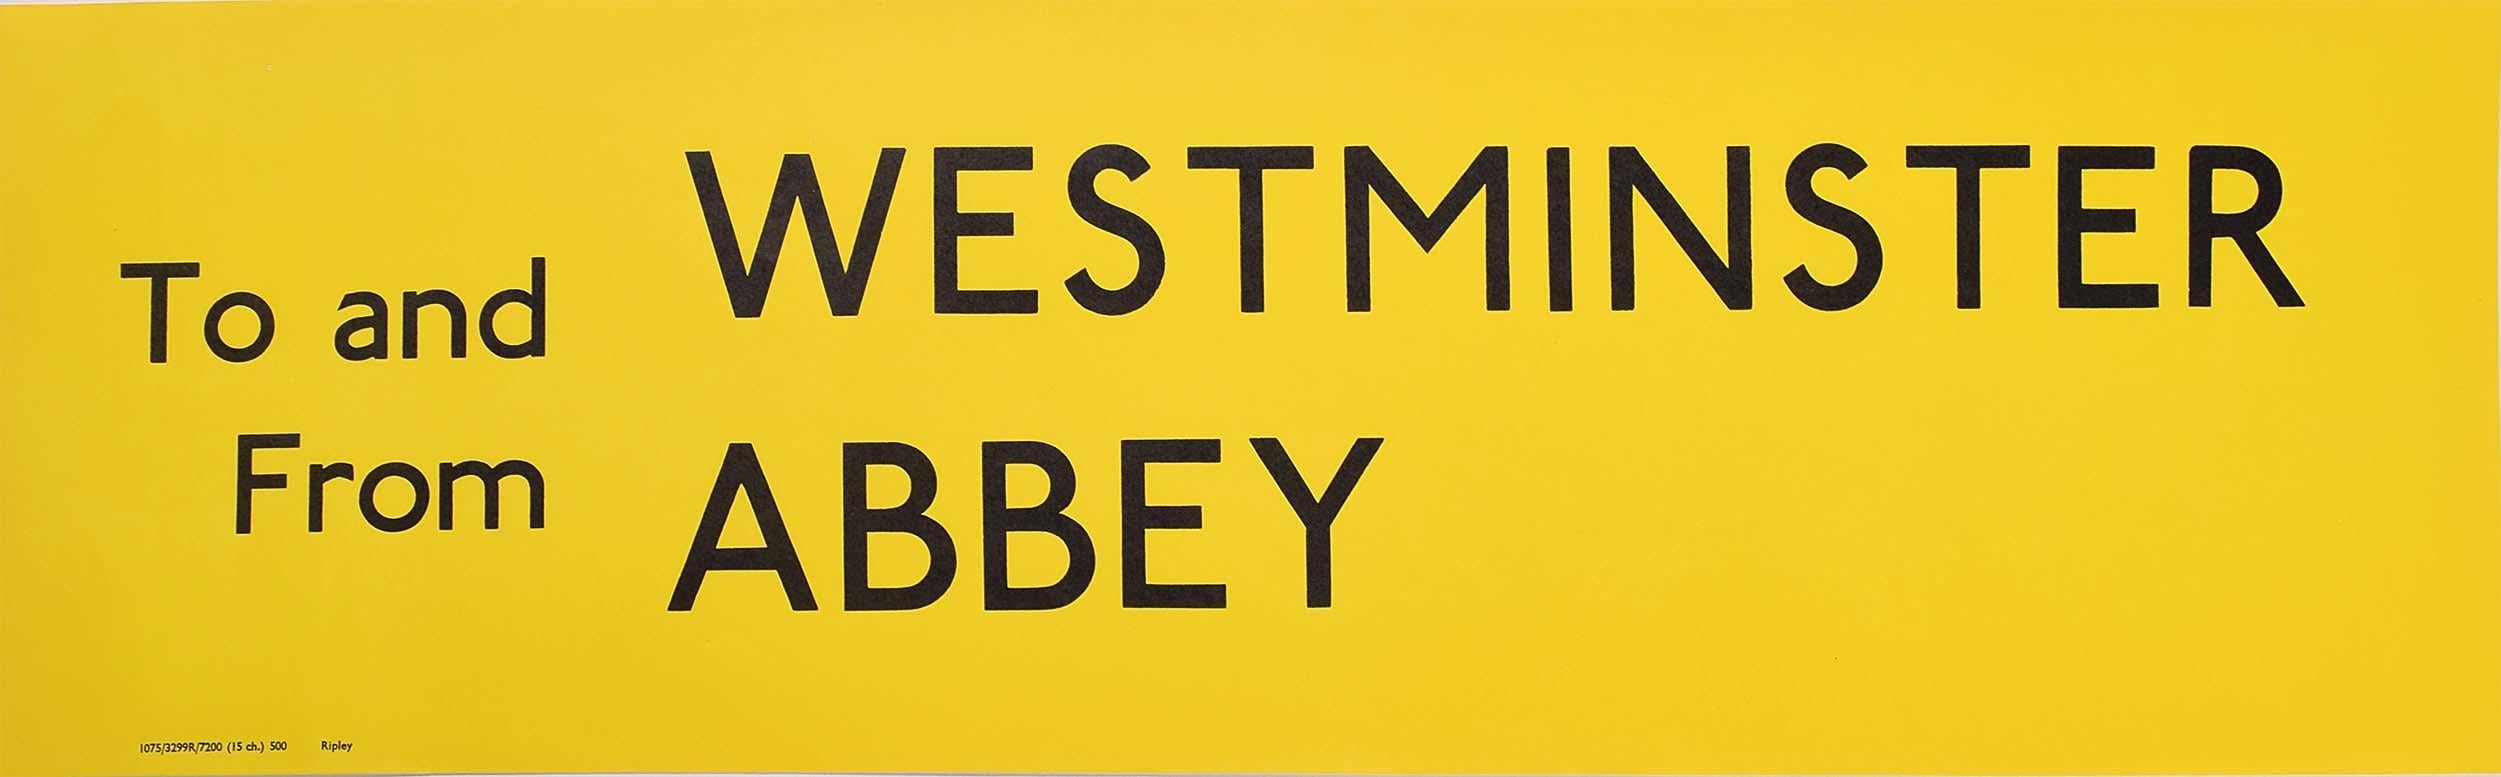 Unknown Print - Westminster Abbey, London England Routemaster Bus sign c. 1970 transport poster